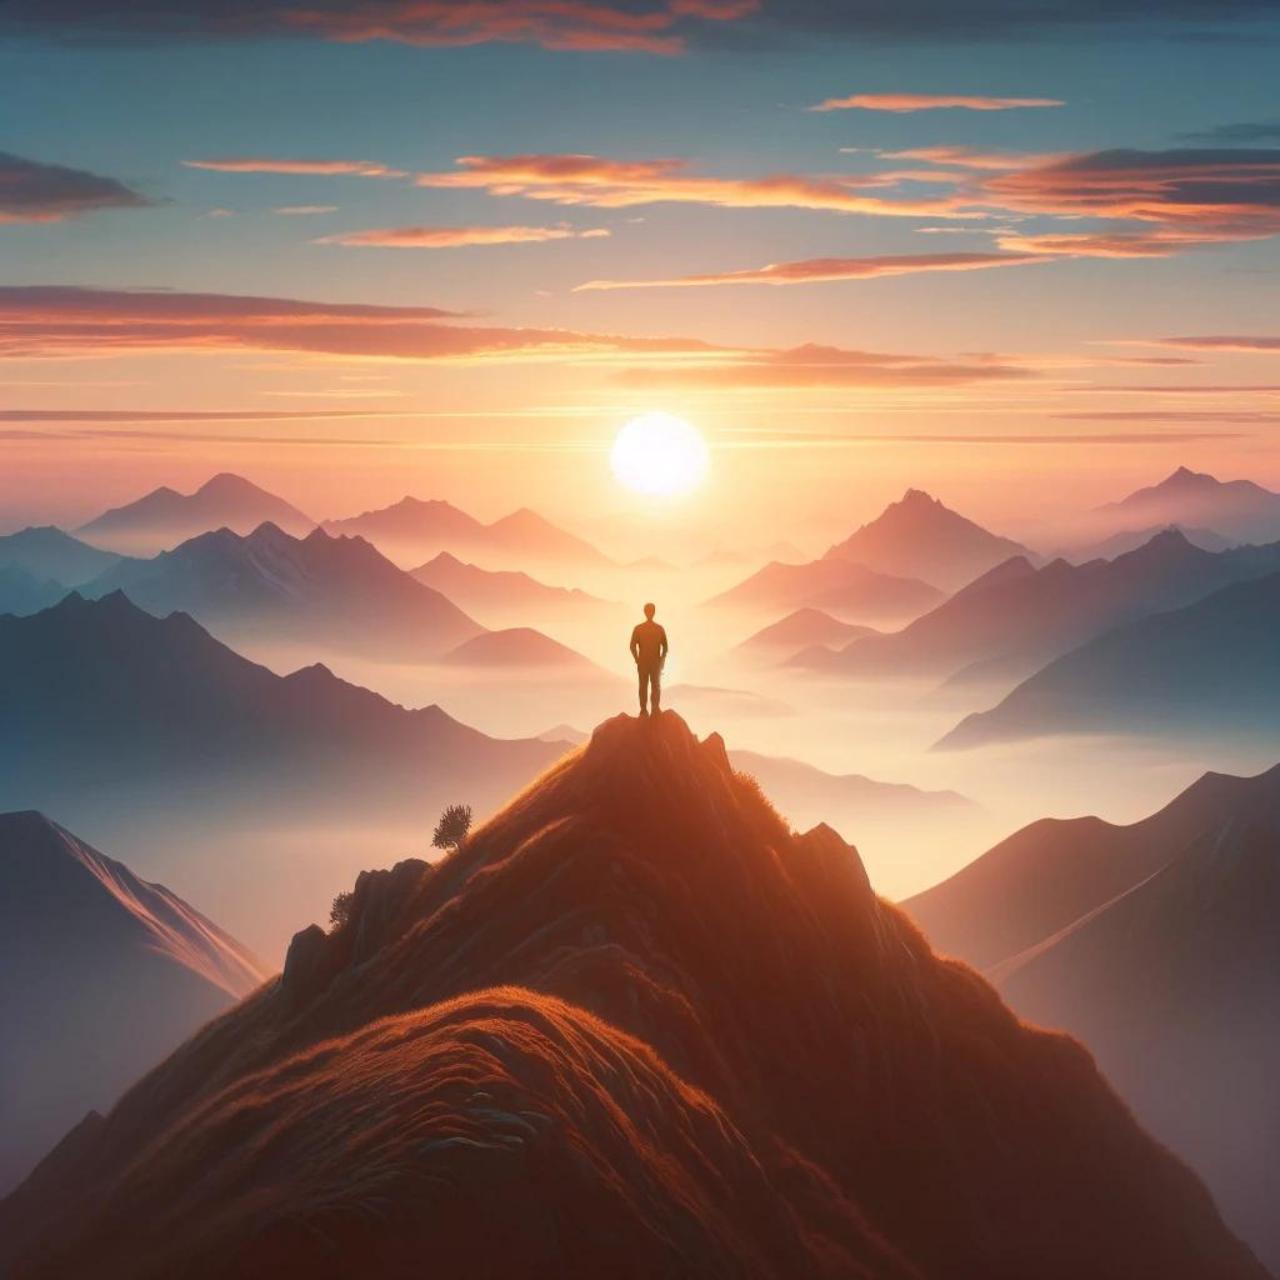 This image features a figure standing at the peak of a mountain, facing a breathtaking sunrise. It captures a moment of tranquility and empowerment, with soft, natural colors that evoke a deep sense of peace, resilience, and hope, symbolizing the beauty of keeping your head up in the face of challenges.